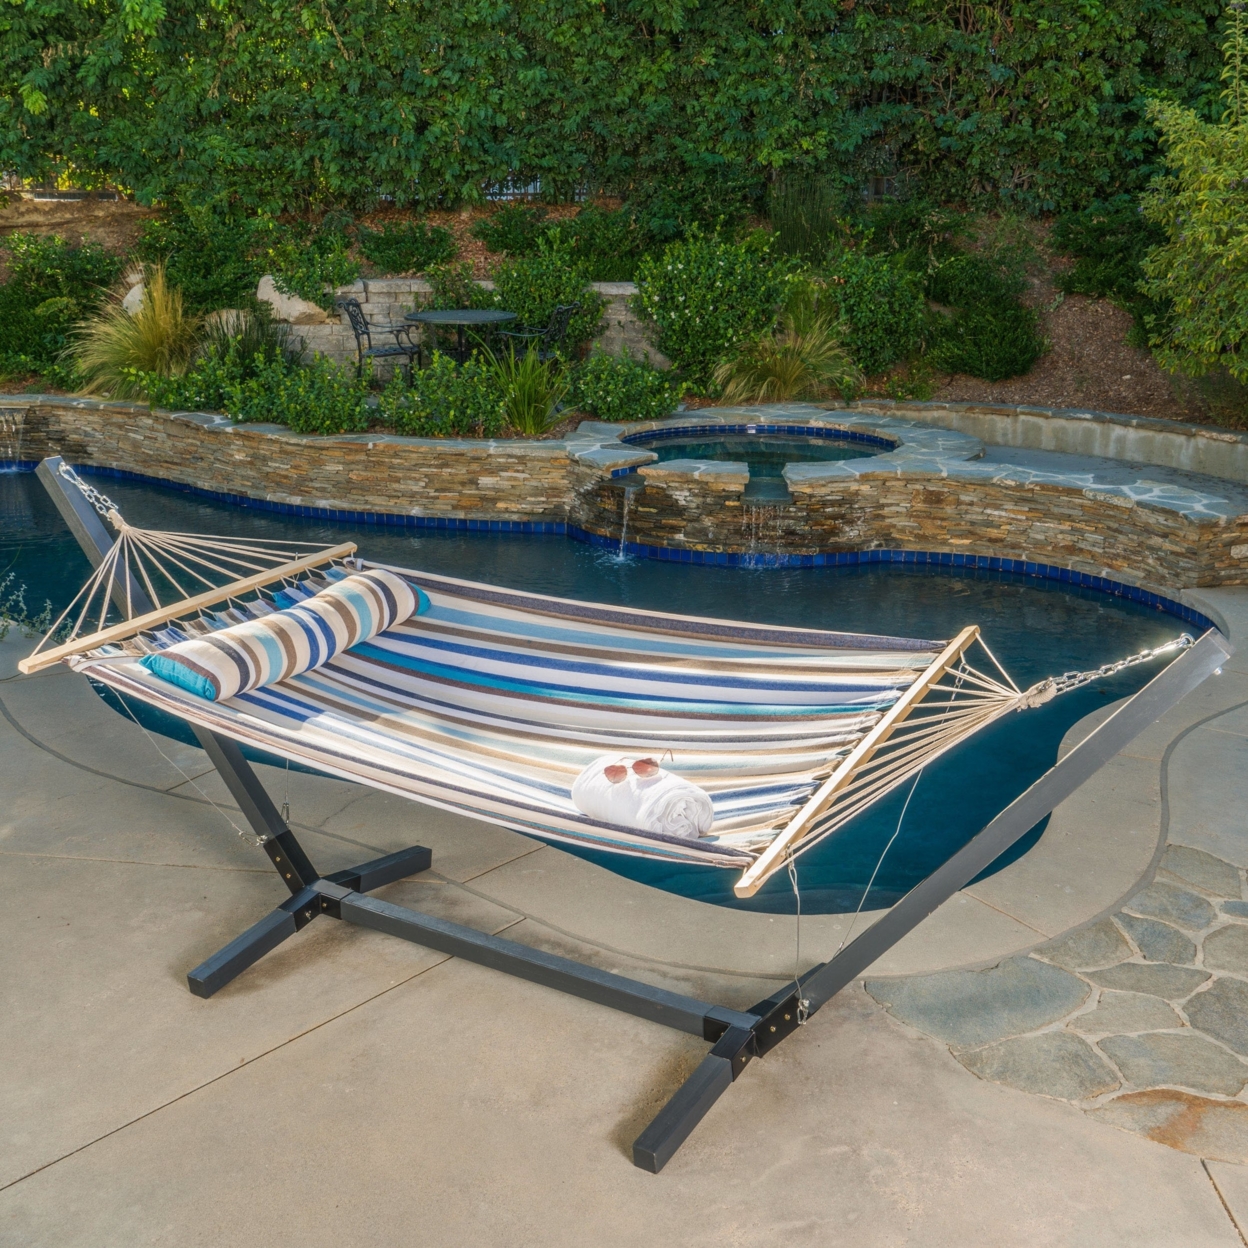 Weston Outdoor Water Resistant Hammock With Larch Wood Frame - Brown/blue/white Striped